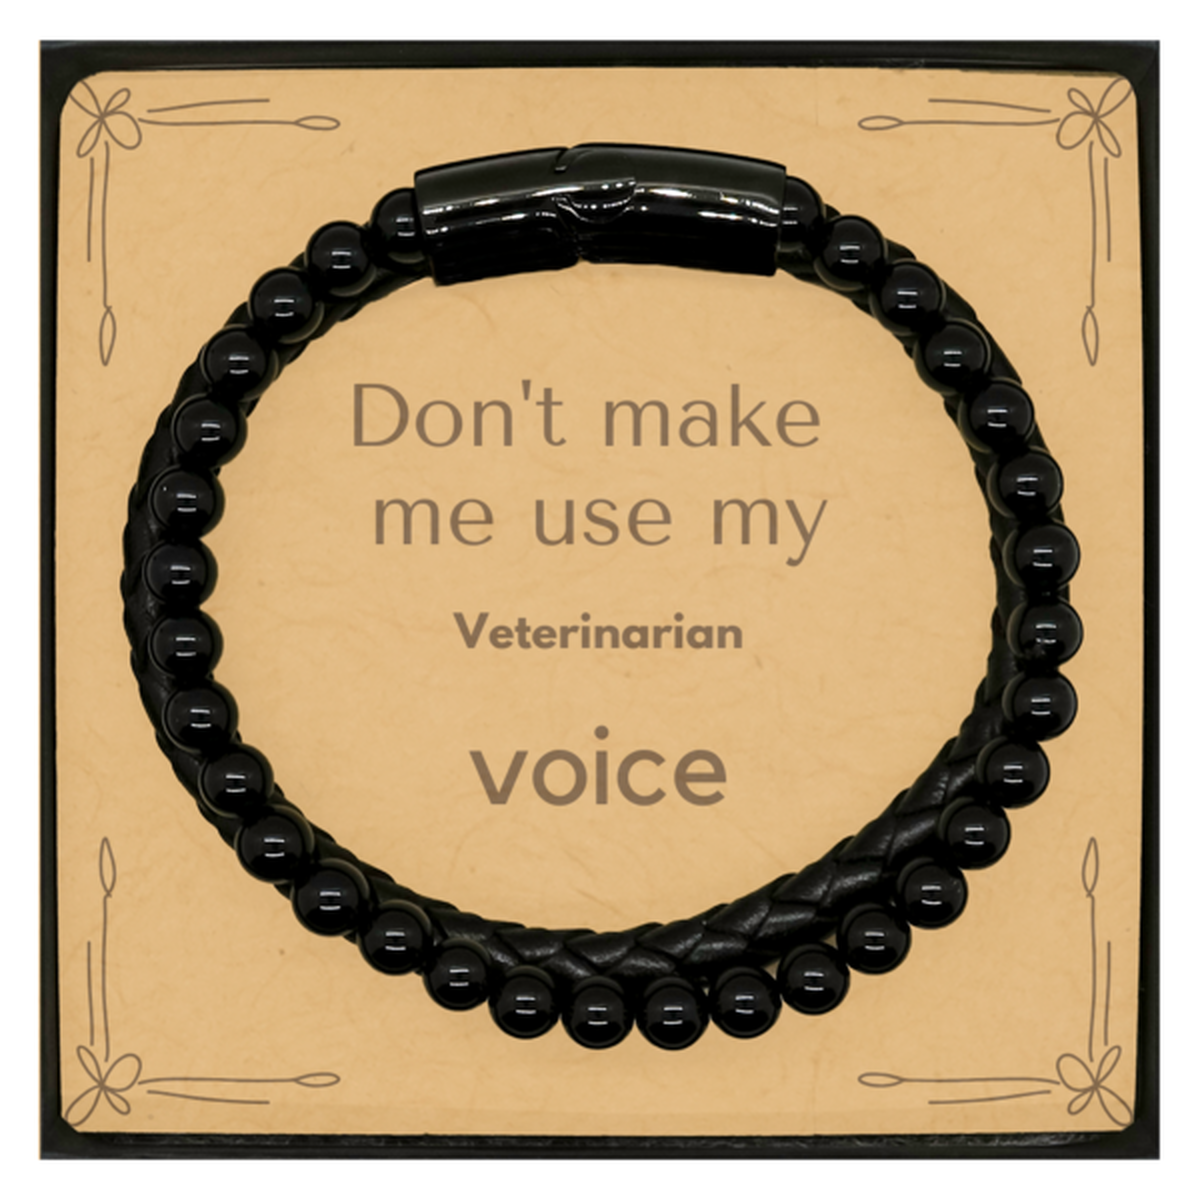 Don't make me use my Veterinarian voice, Sarcasm Veterinarian Card Gifts, Christmas Veterinarian Stone Leather Bracelets Birthday Unique Gifts For Veterinarian Coworkers, Men, Women, Colleague, Friends